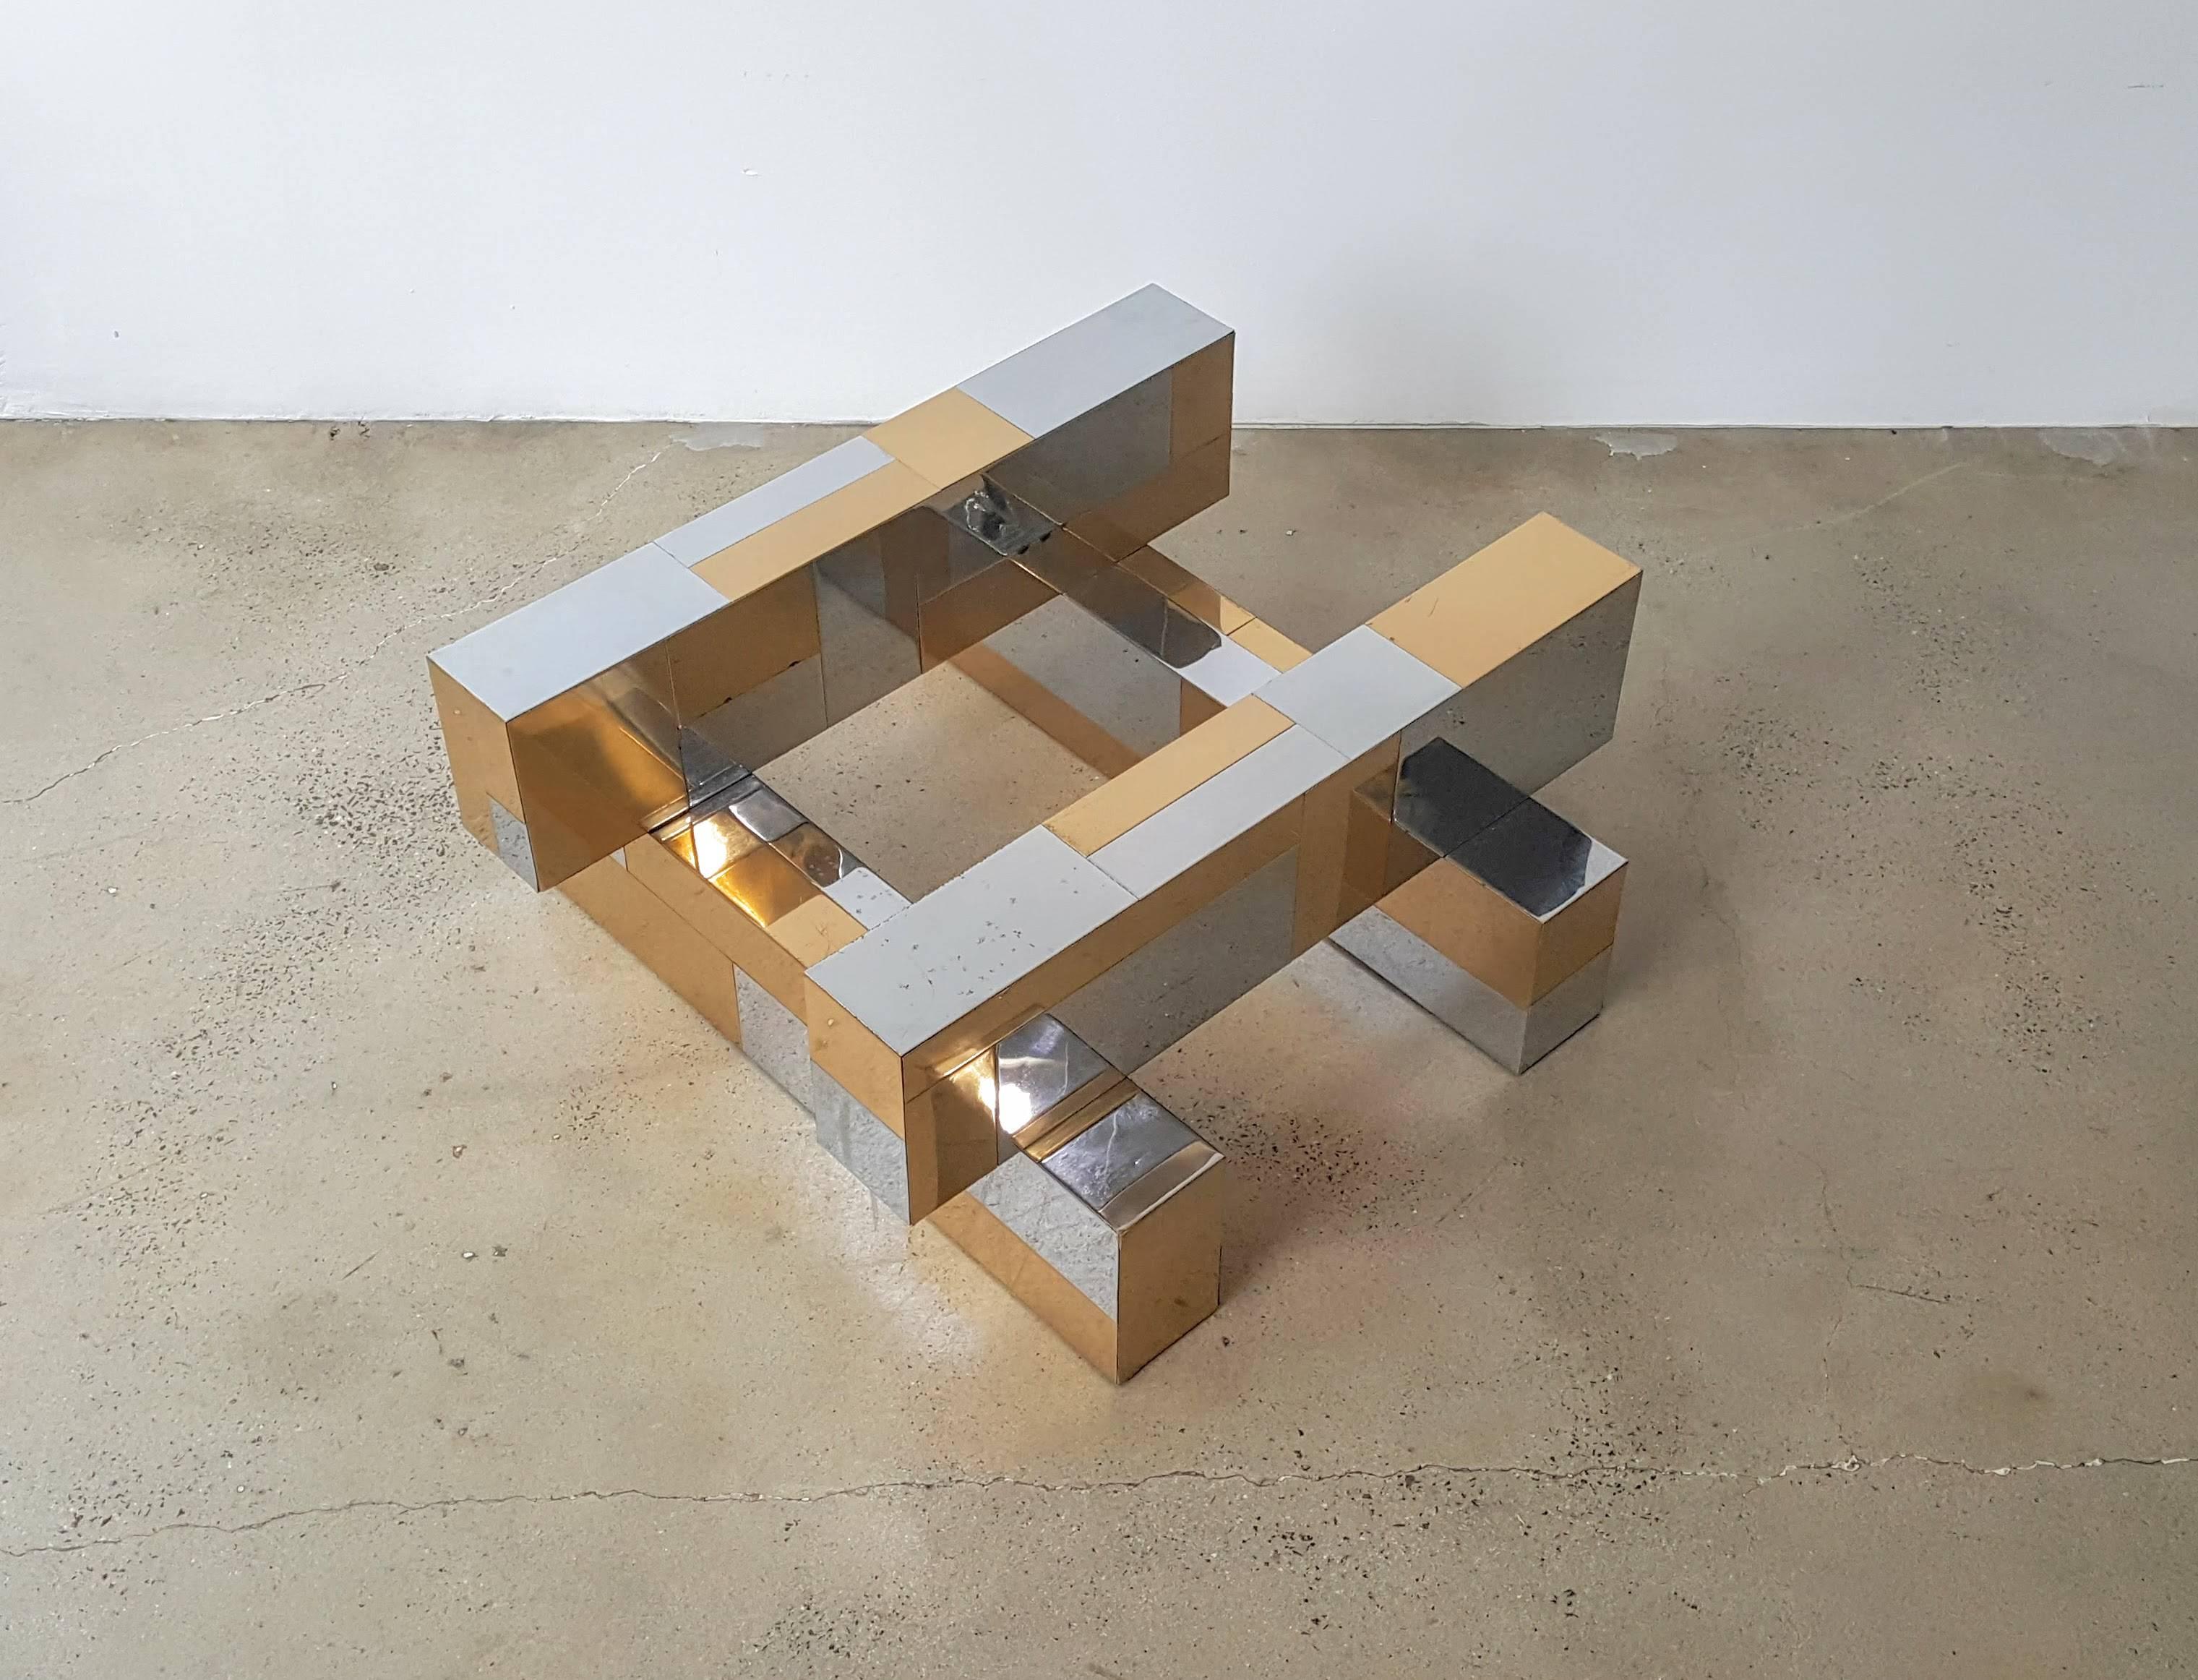 Glamorous Paul Evans Cityscape coffee table in brass and chrome, 1970s. This piece boasts the iconic brutalist cityscape tiling that made Paul Evans a commercial success in the 1970s. This specific example uses mixed metals which was also popular at